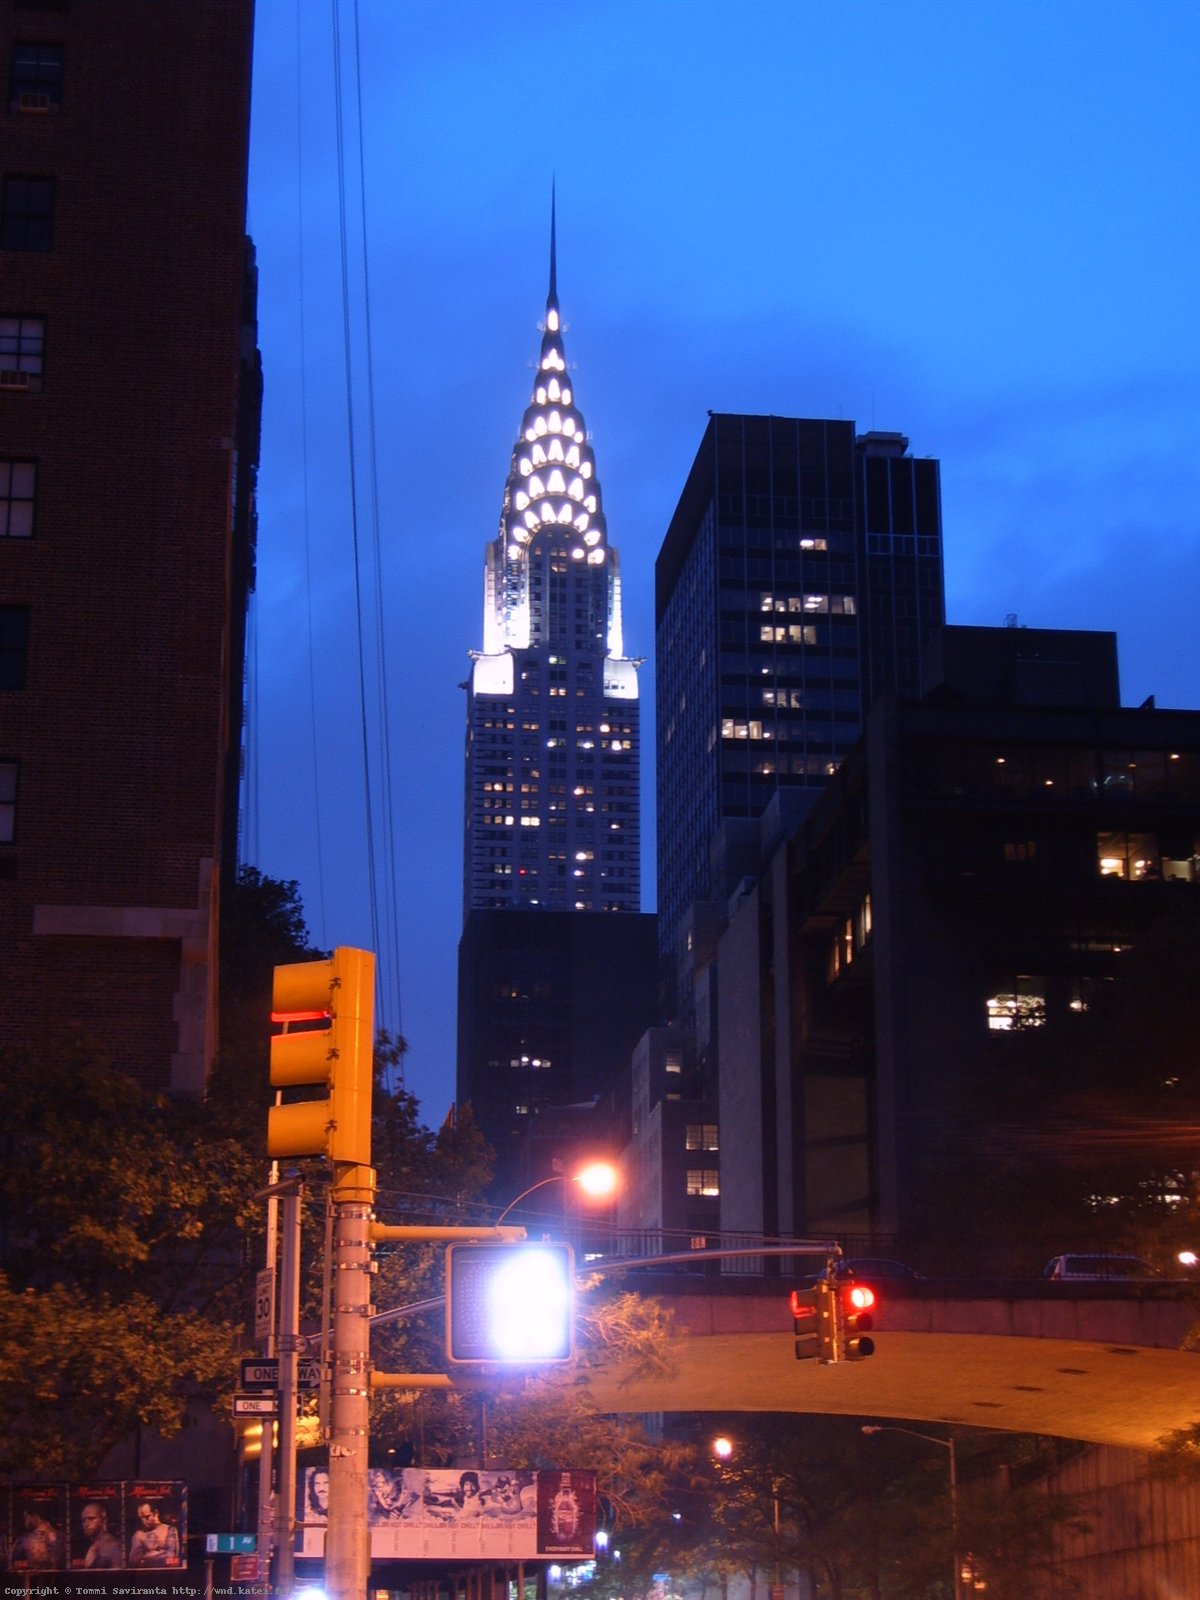 Day #2: Chrysler Building at early night